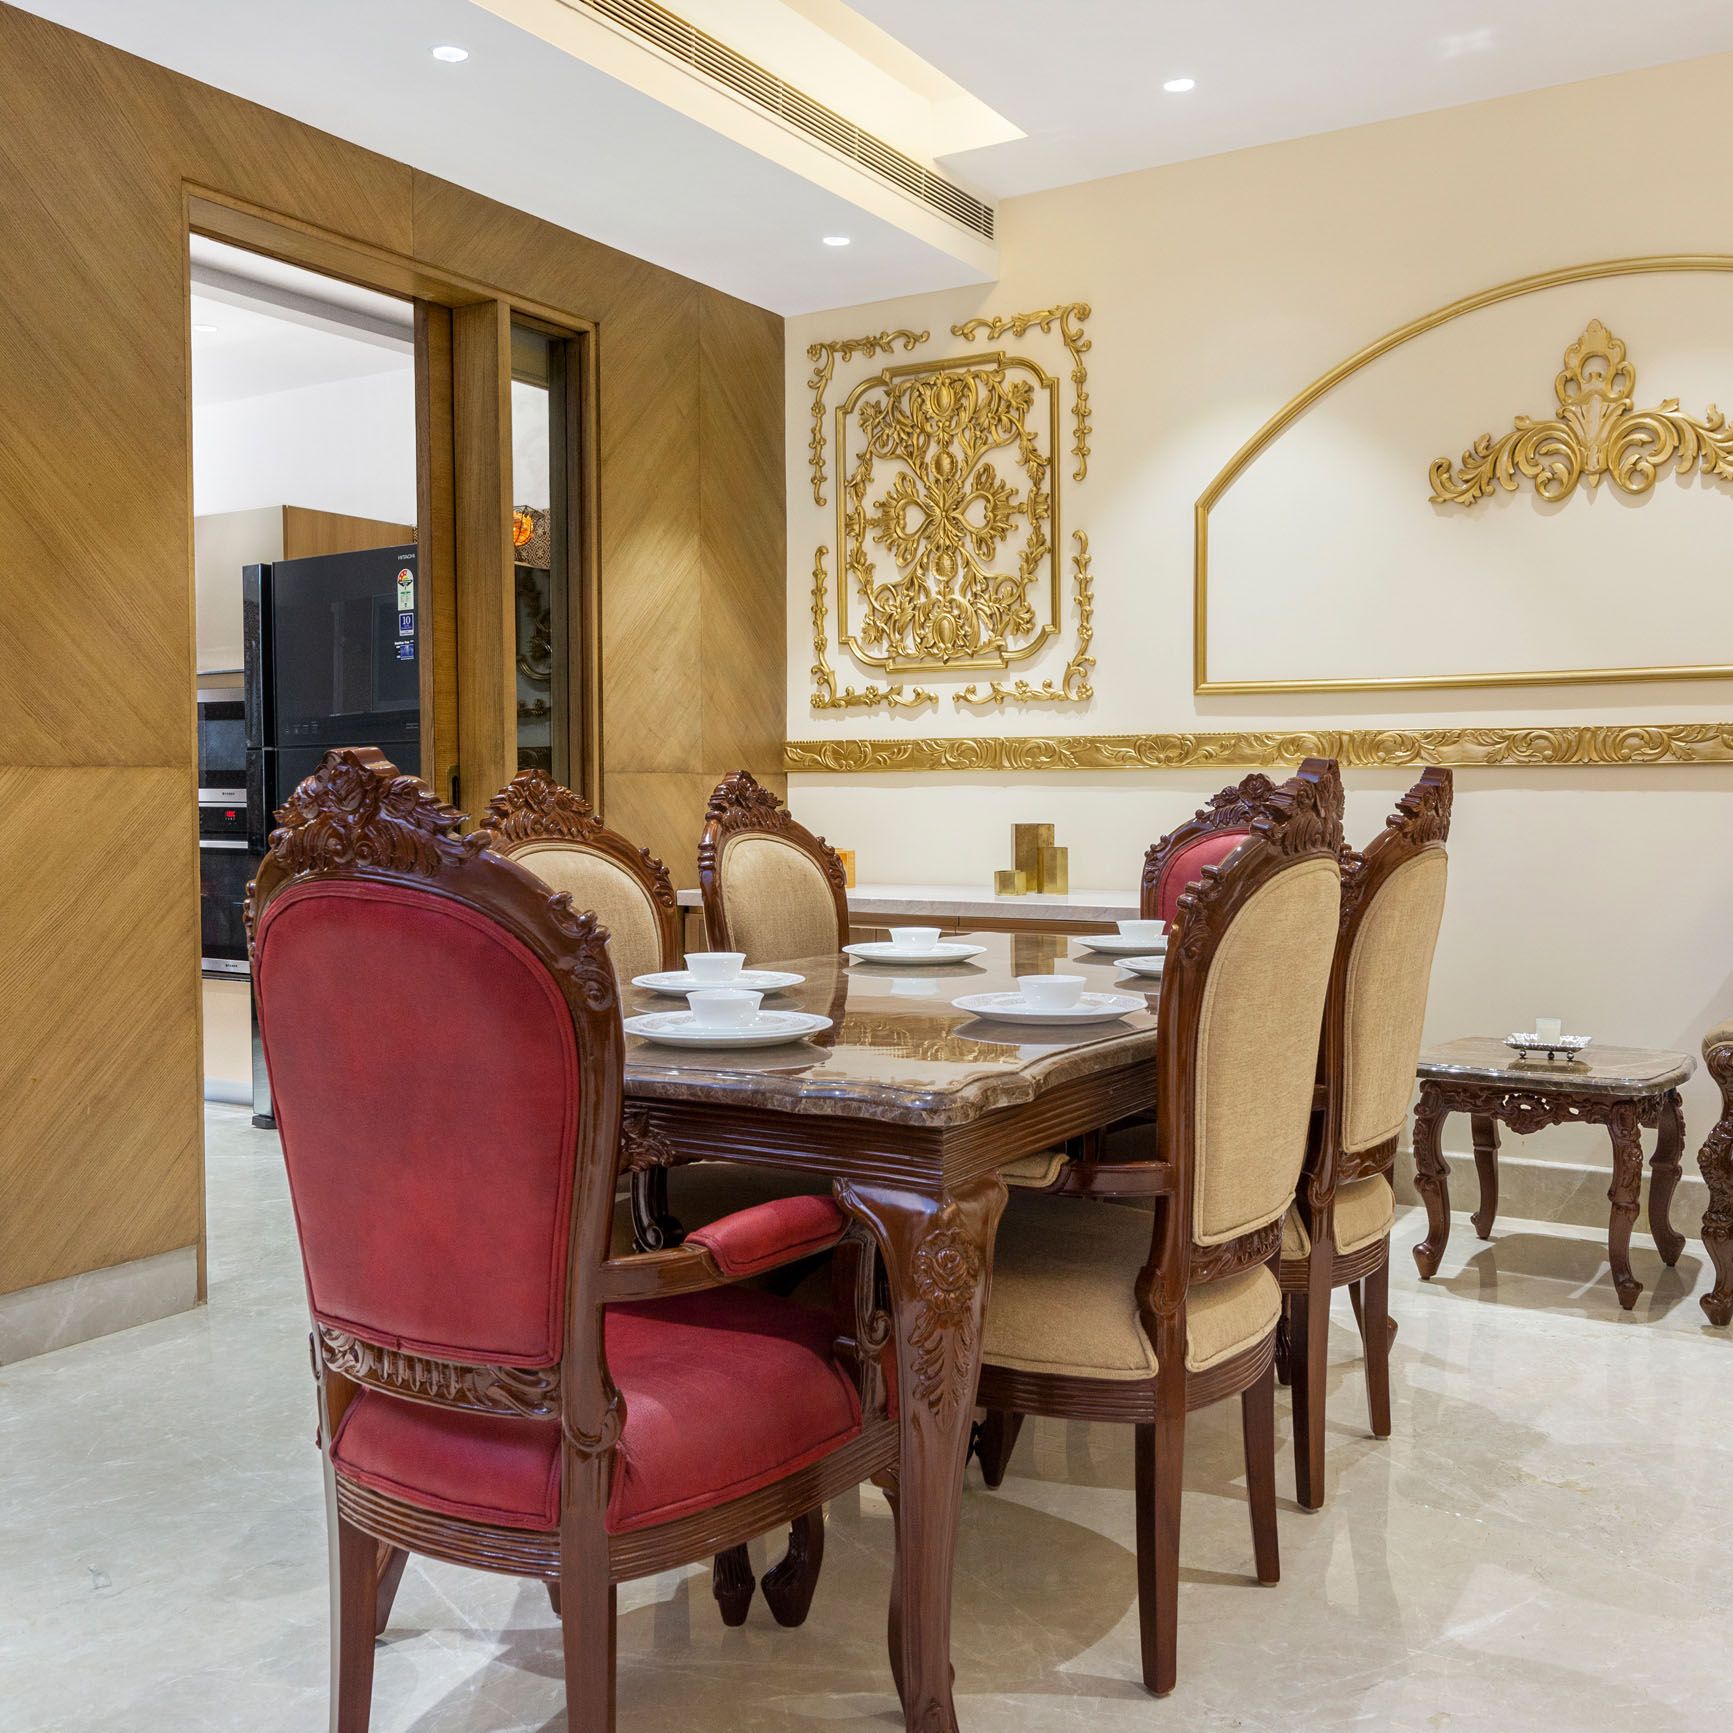 Contemporary 6-Seater Dining Room Design With Golden Wall Trims